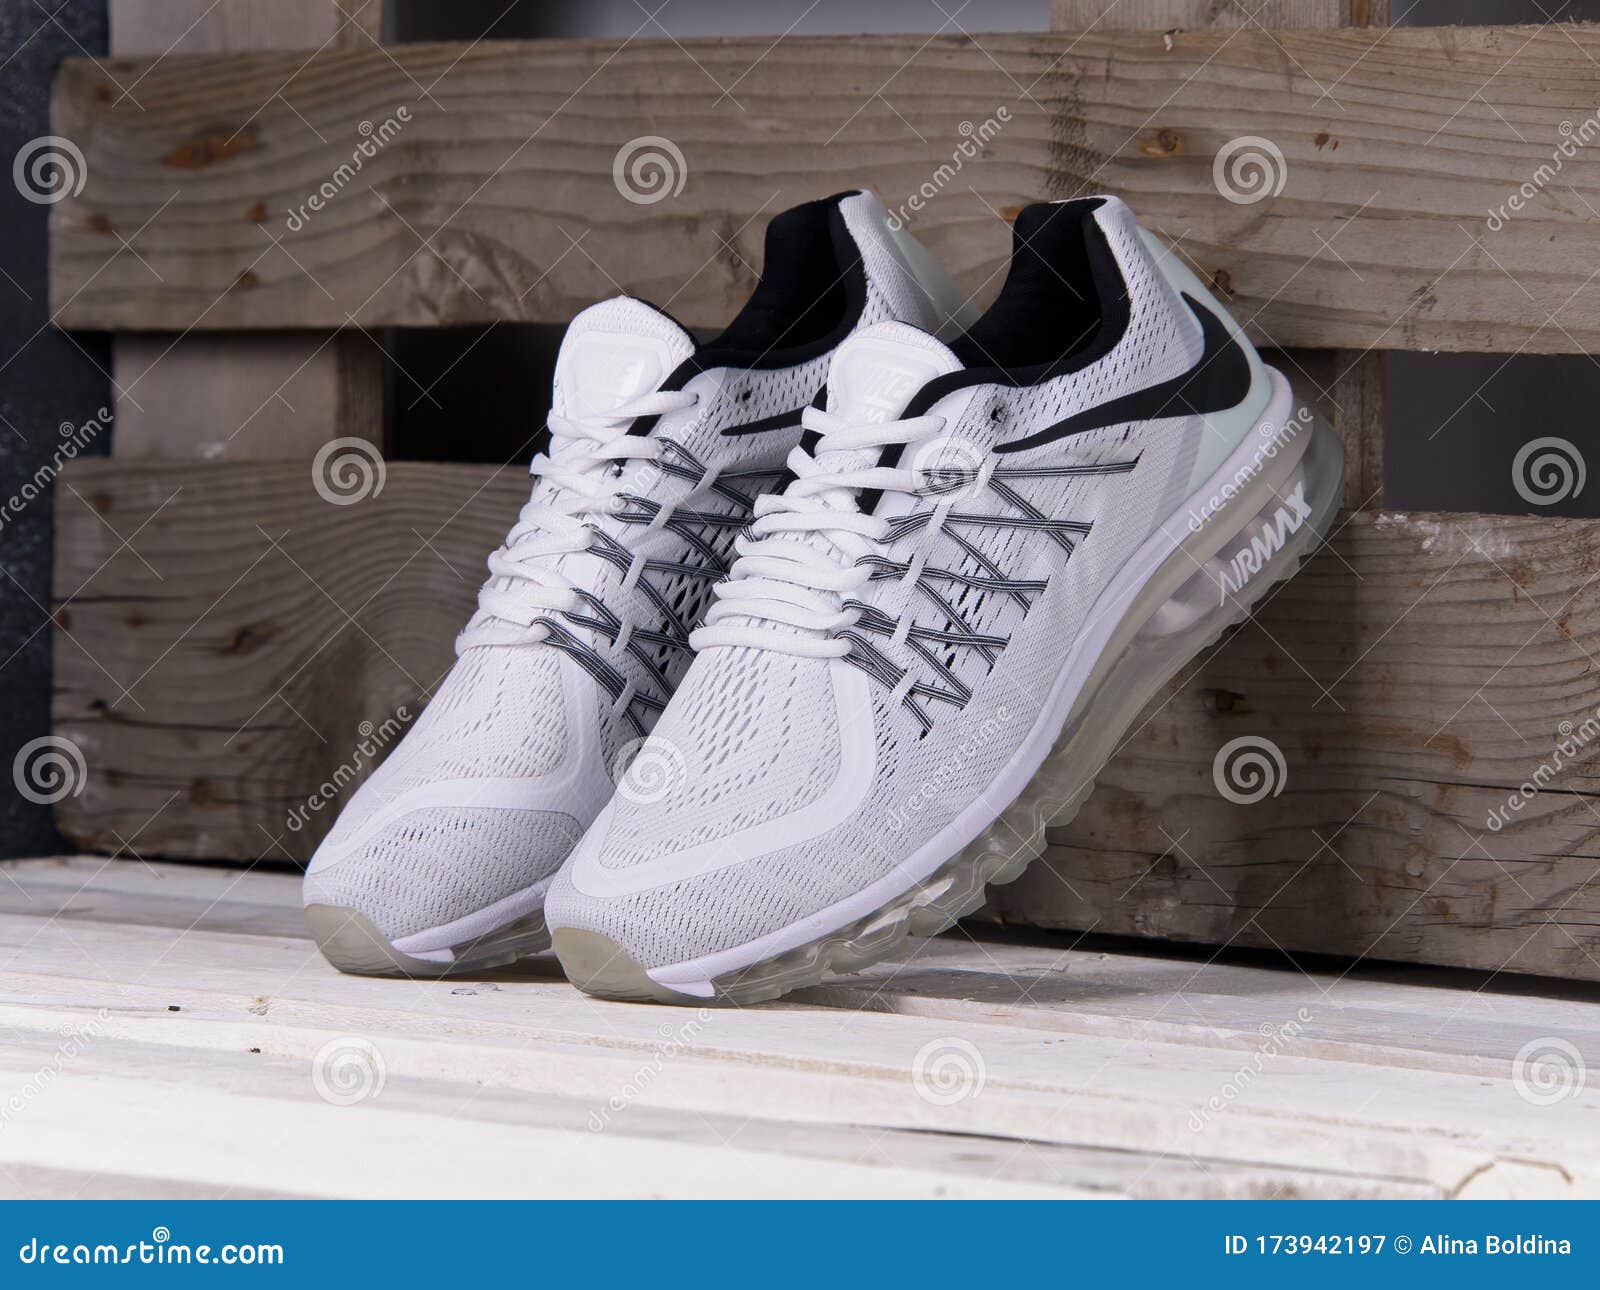 Vacante Ahorro Lo encontré White Nike Air Max 2015 Sneakers, Running Shoes on Wooden Background.  Krasnoyarsk, Russia - July 10, 2017 Editorial Photography - Image of  fashion, shoe: 173942197